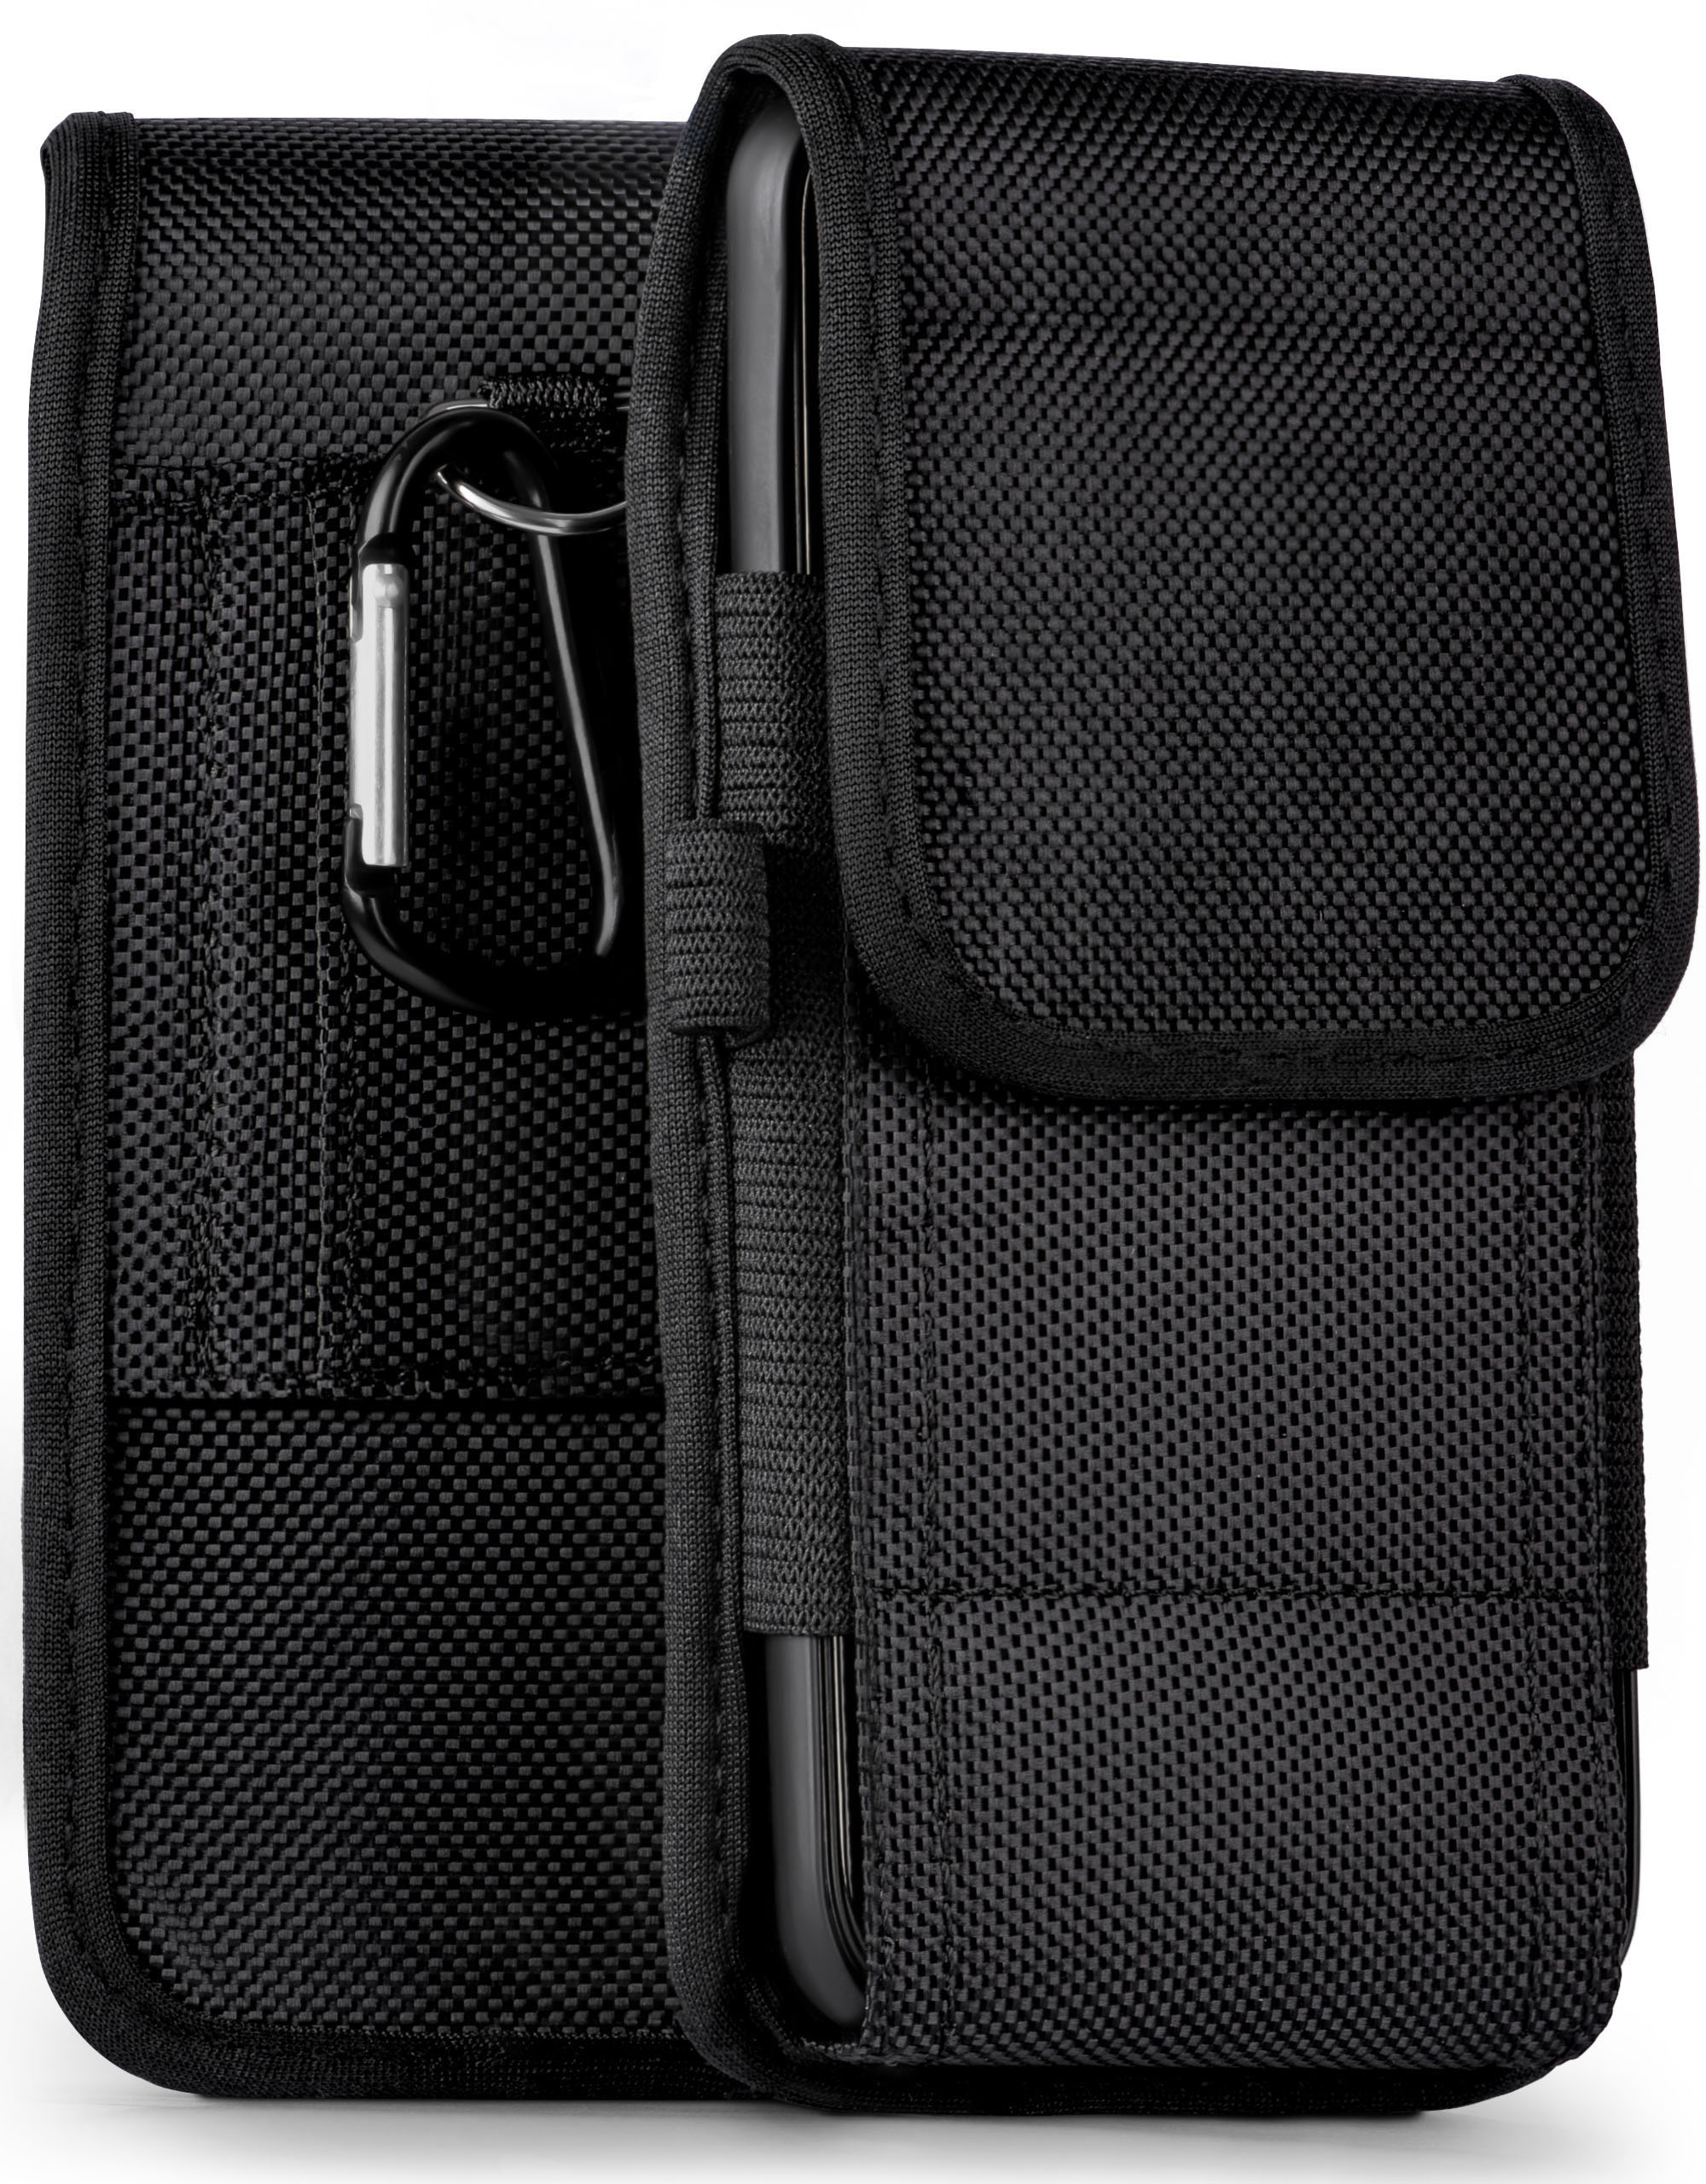 Holster, Trail Agility Case, MOEX LG, G6,